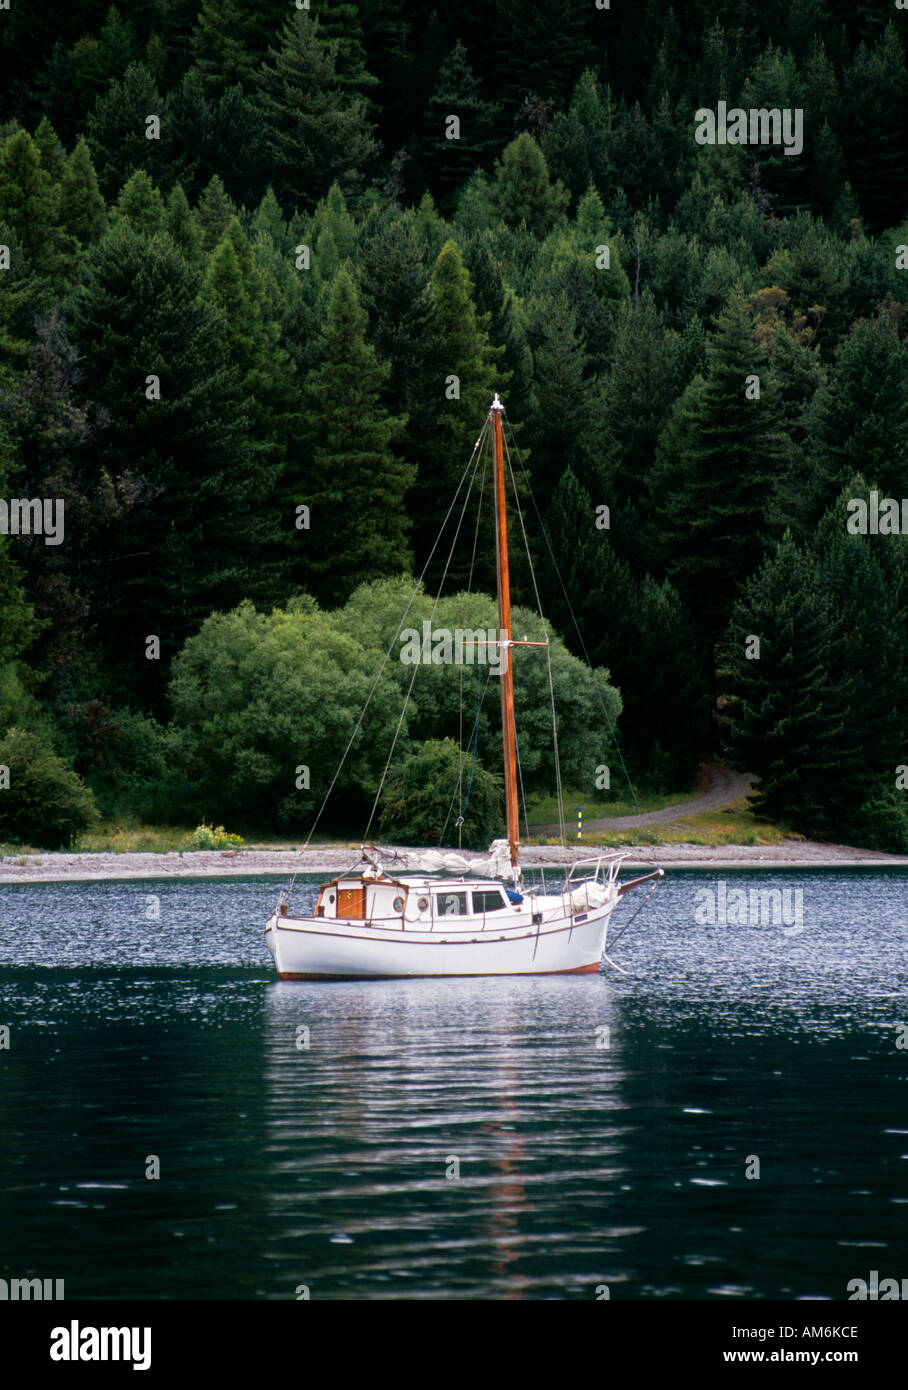 Yacht on a calm mountain lake with forest in background Stock Photo